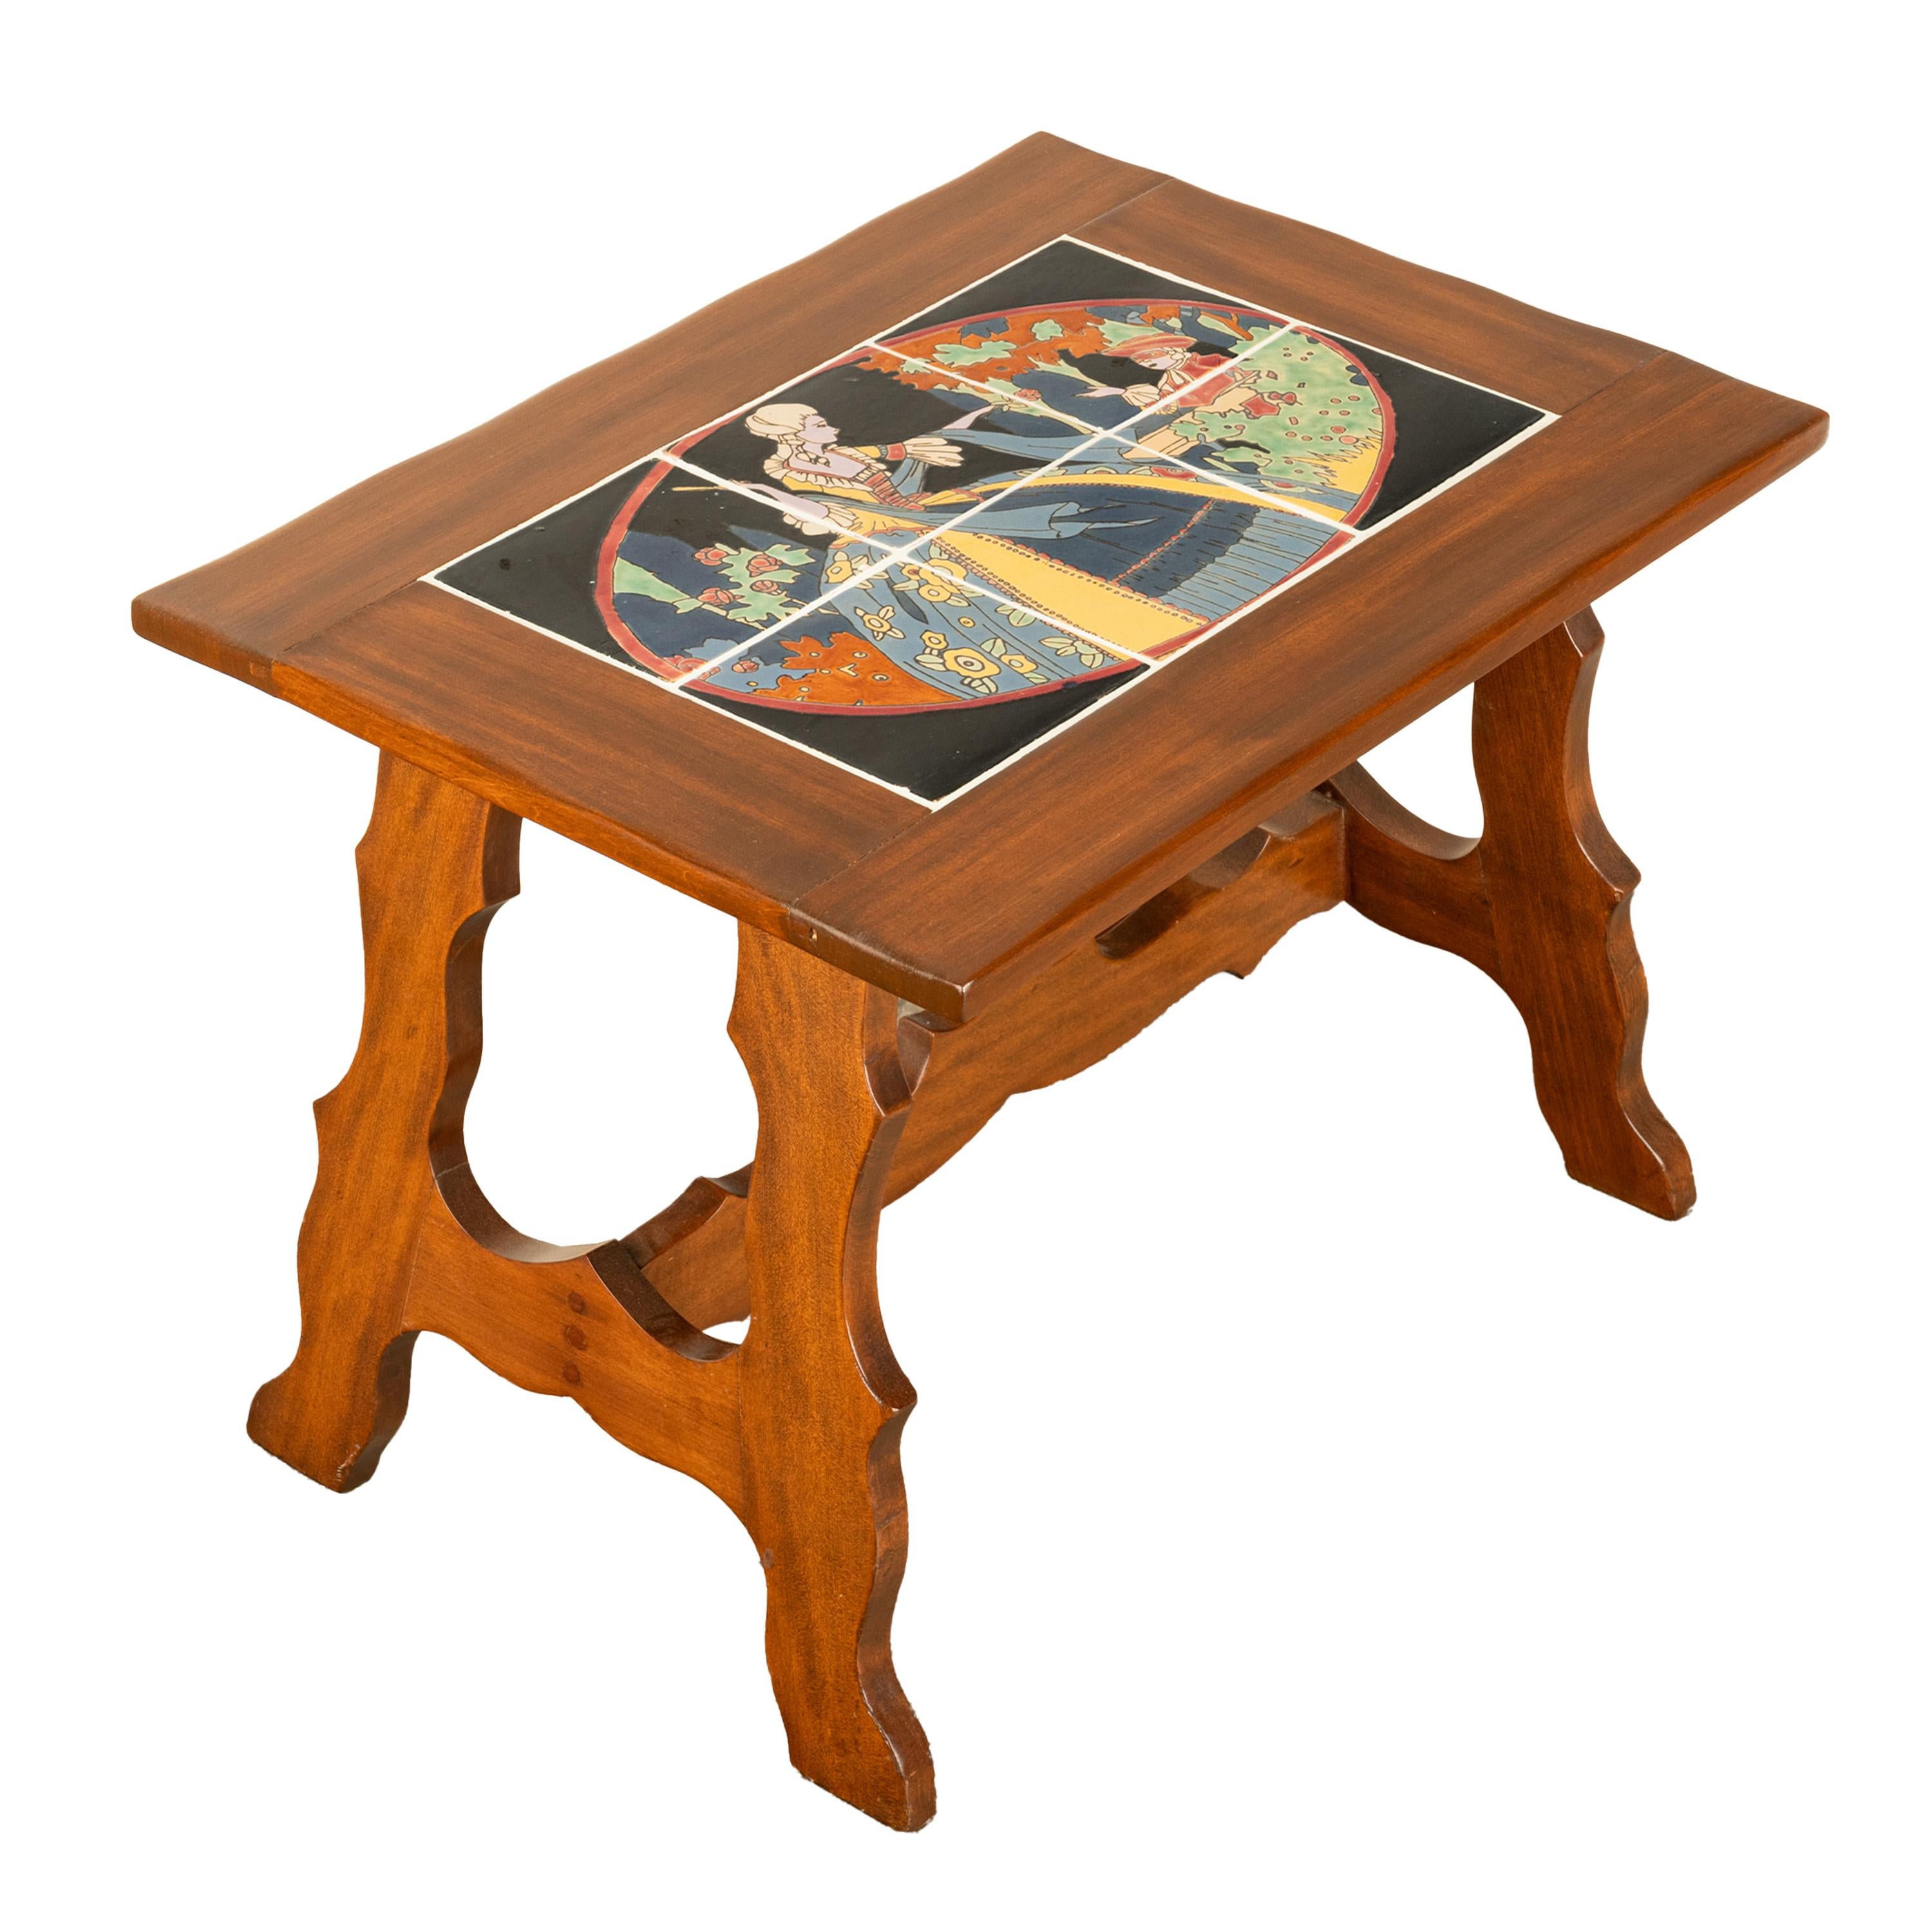 Antique Mission Catalina Monterrey California Tile Top Walnut Coffee Table 1930 For Sale